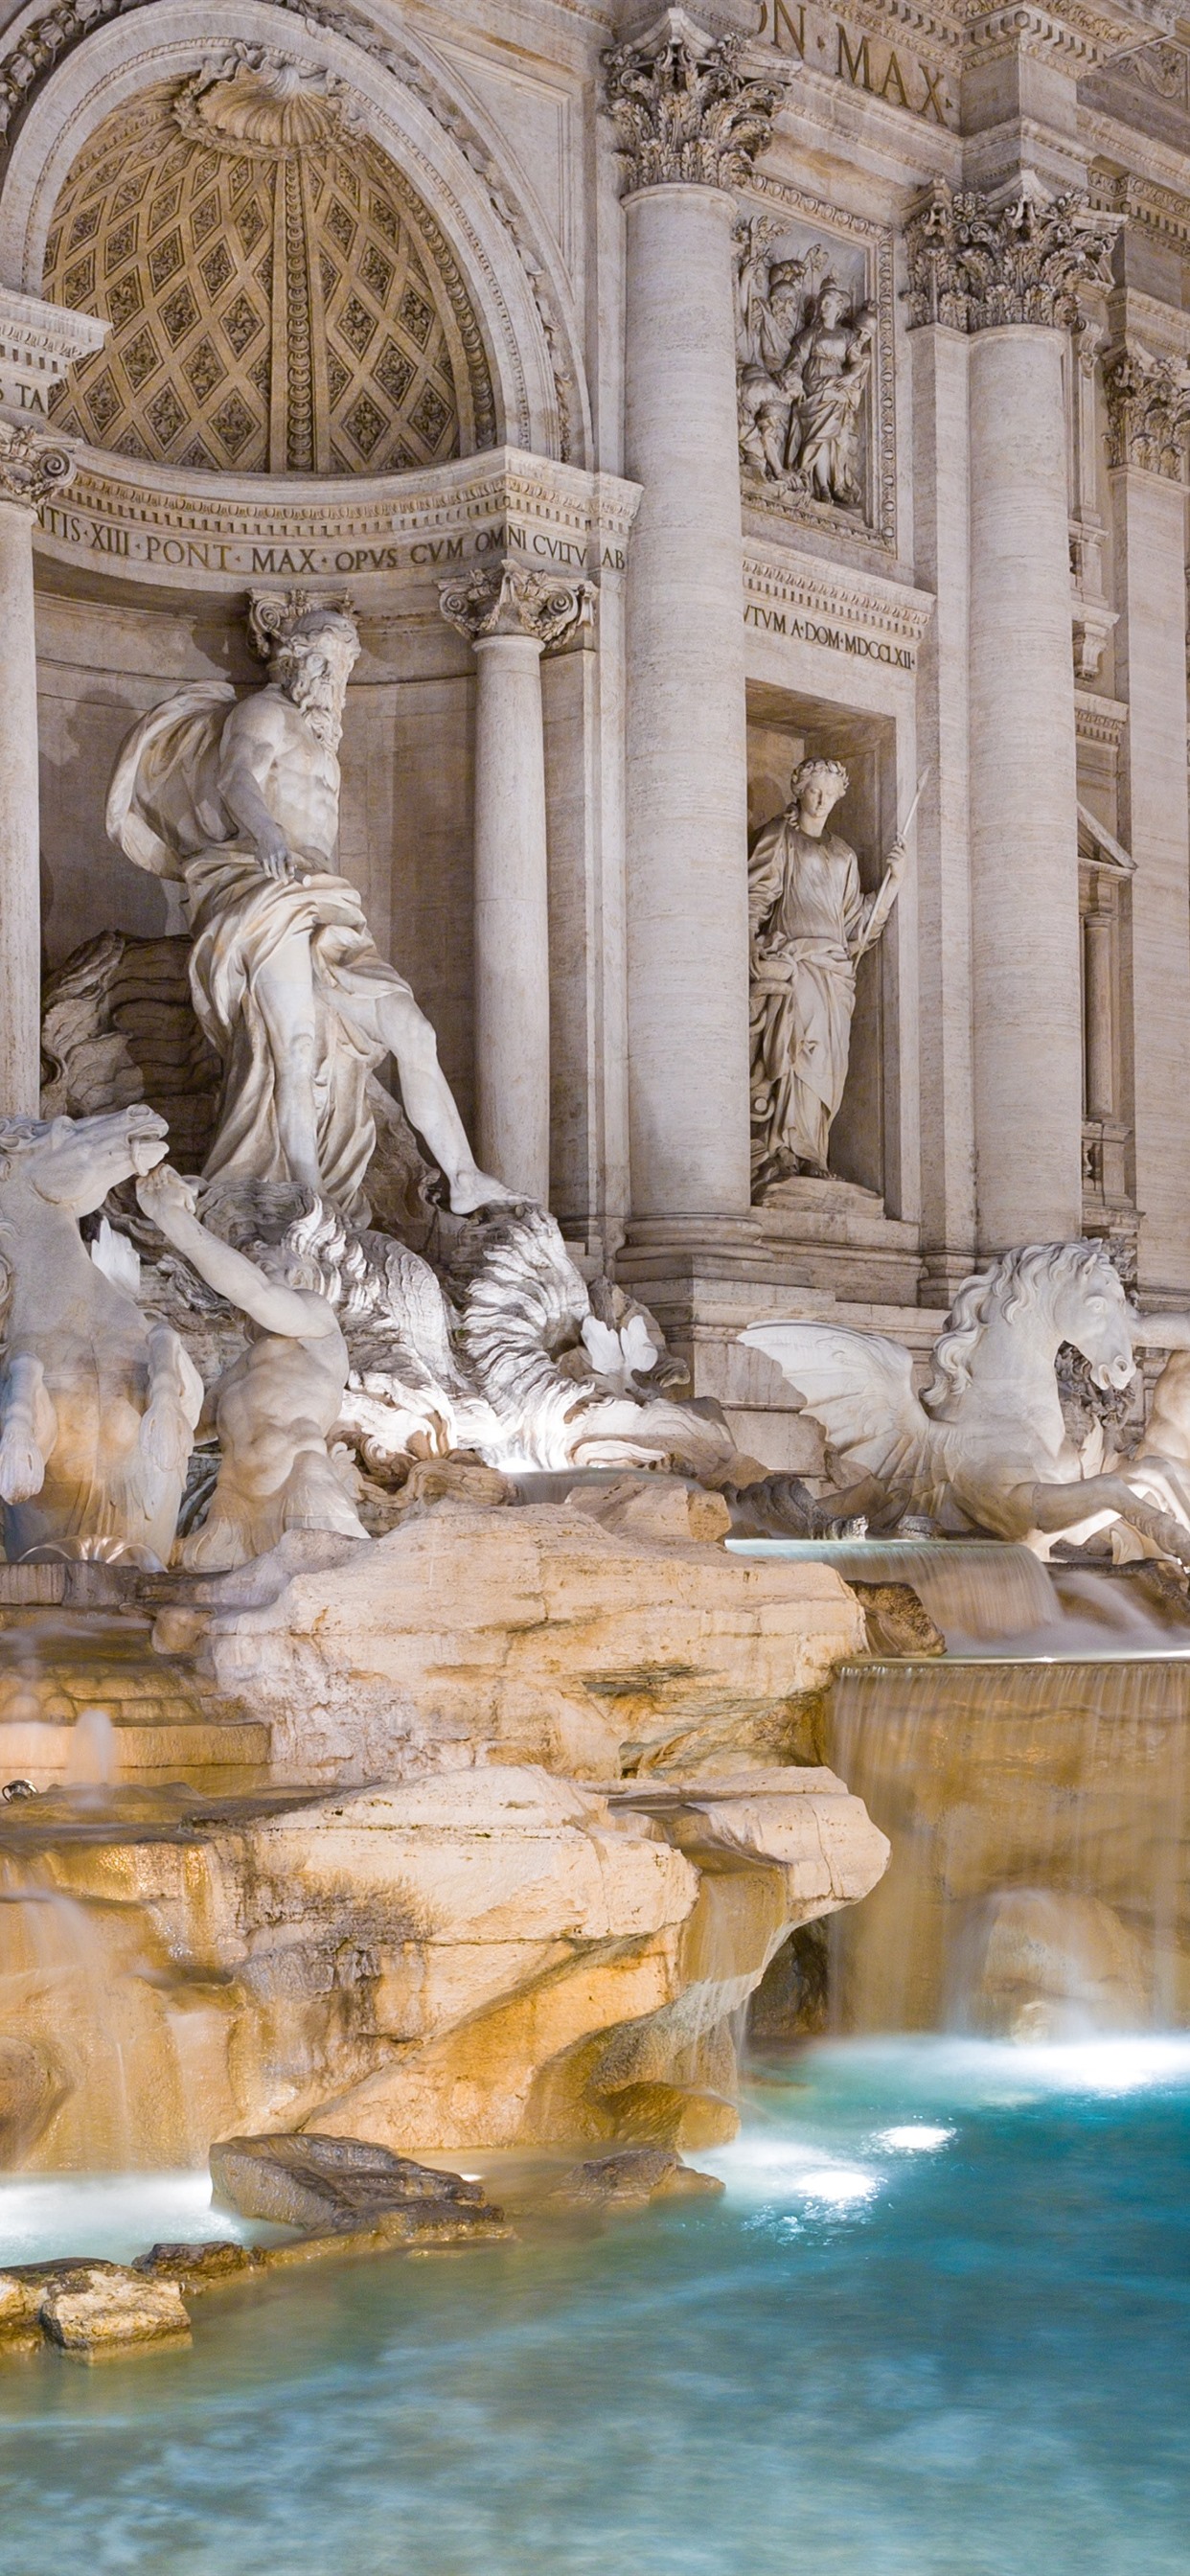 Rome, Fountain, Water, Statue, Night, Italy 1242x2688 IPhone 11 Pro XS Max Wallpaper, Background, Picture, Image